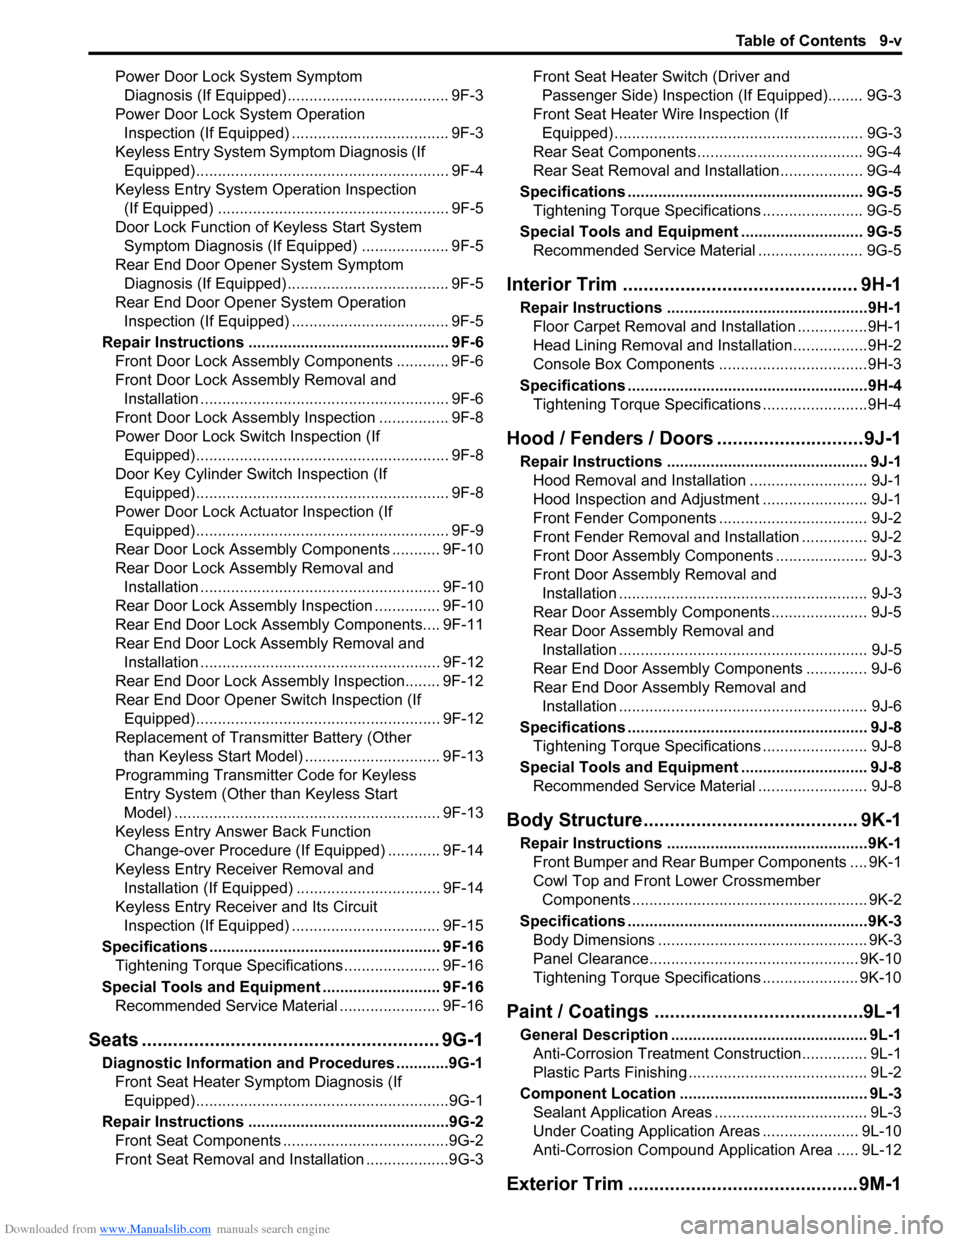 SUZUKI SX4 2006 1.G Service Workshop Manual Downloaded from www.Manualslib.com manuals search engine Table of Contents 9-v
Power Door Lock System Symptom 
Diagnosis (If Equipped)..................................... 9F-3
Power Door Lock System 